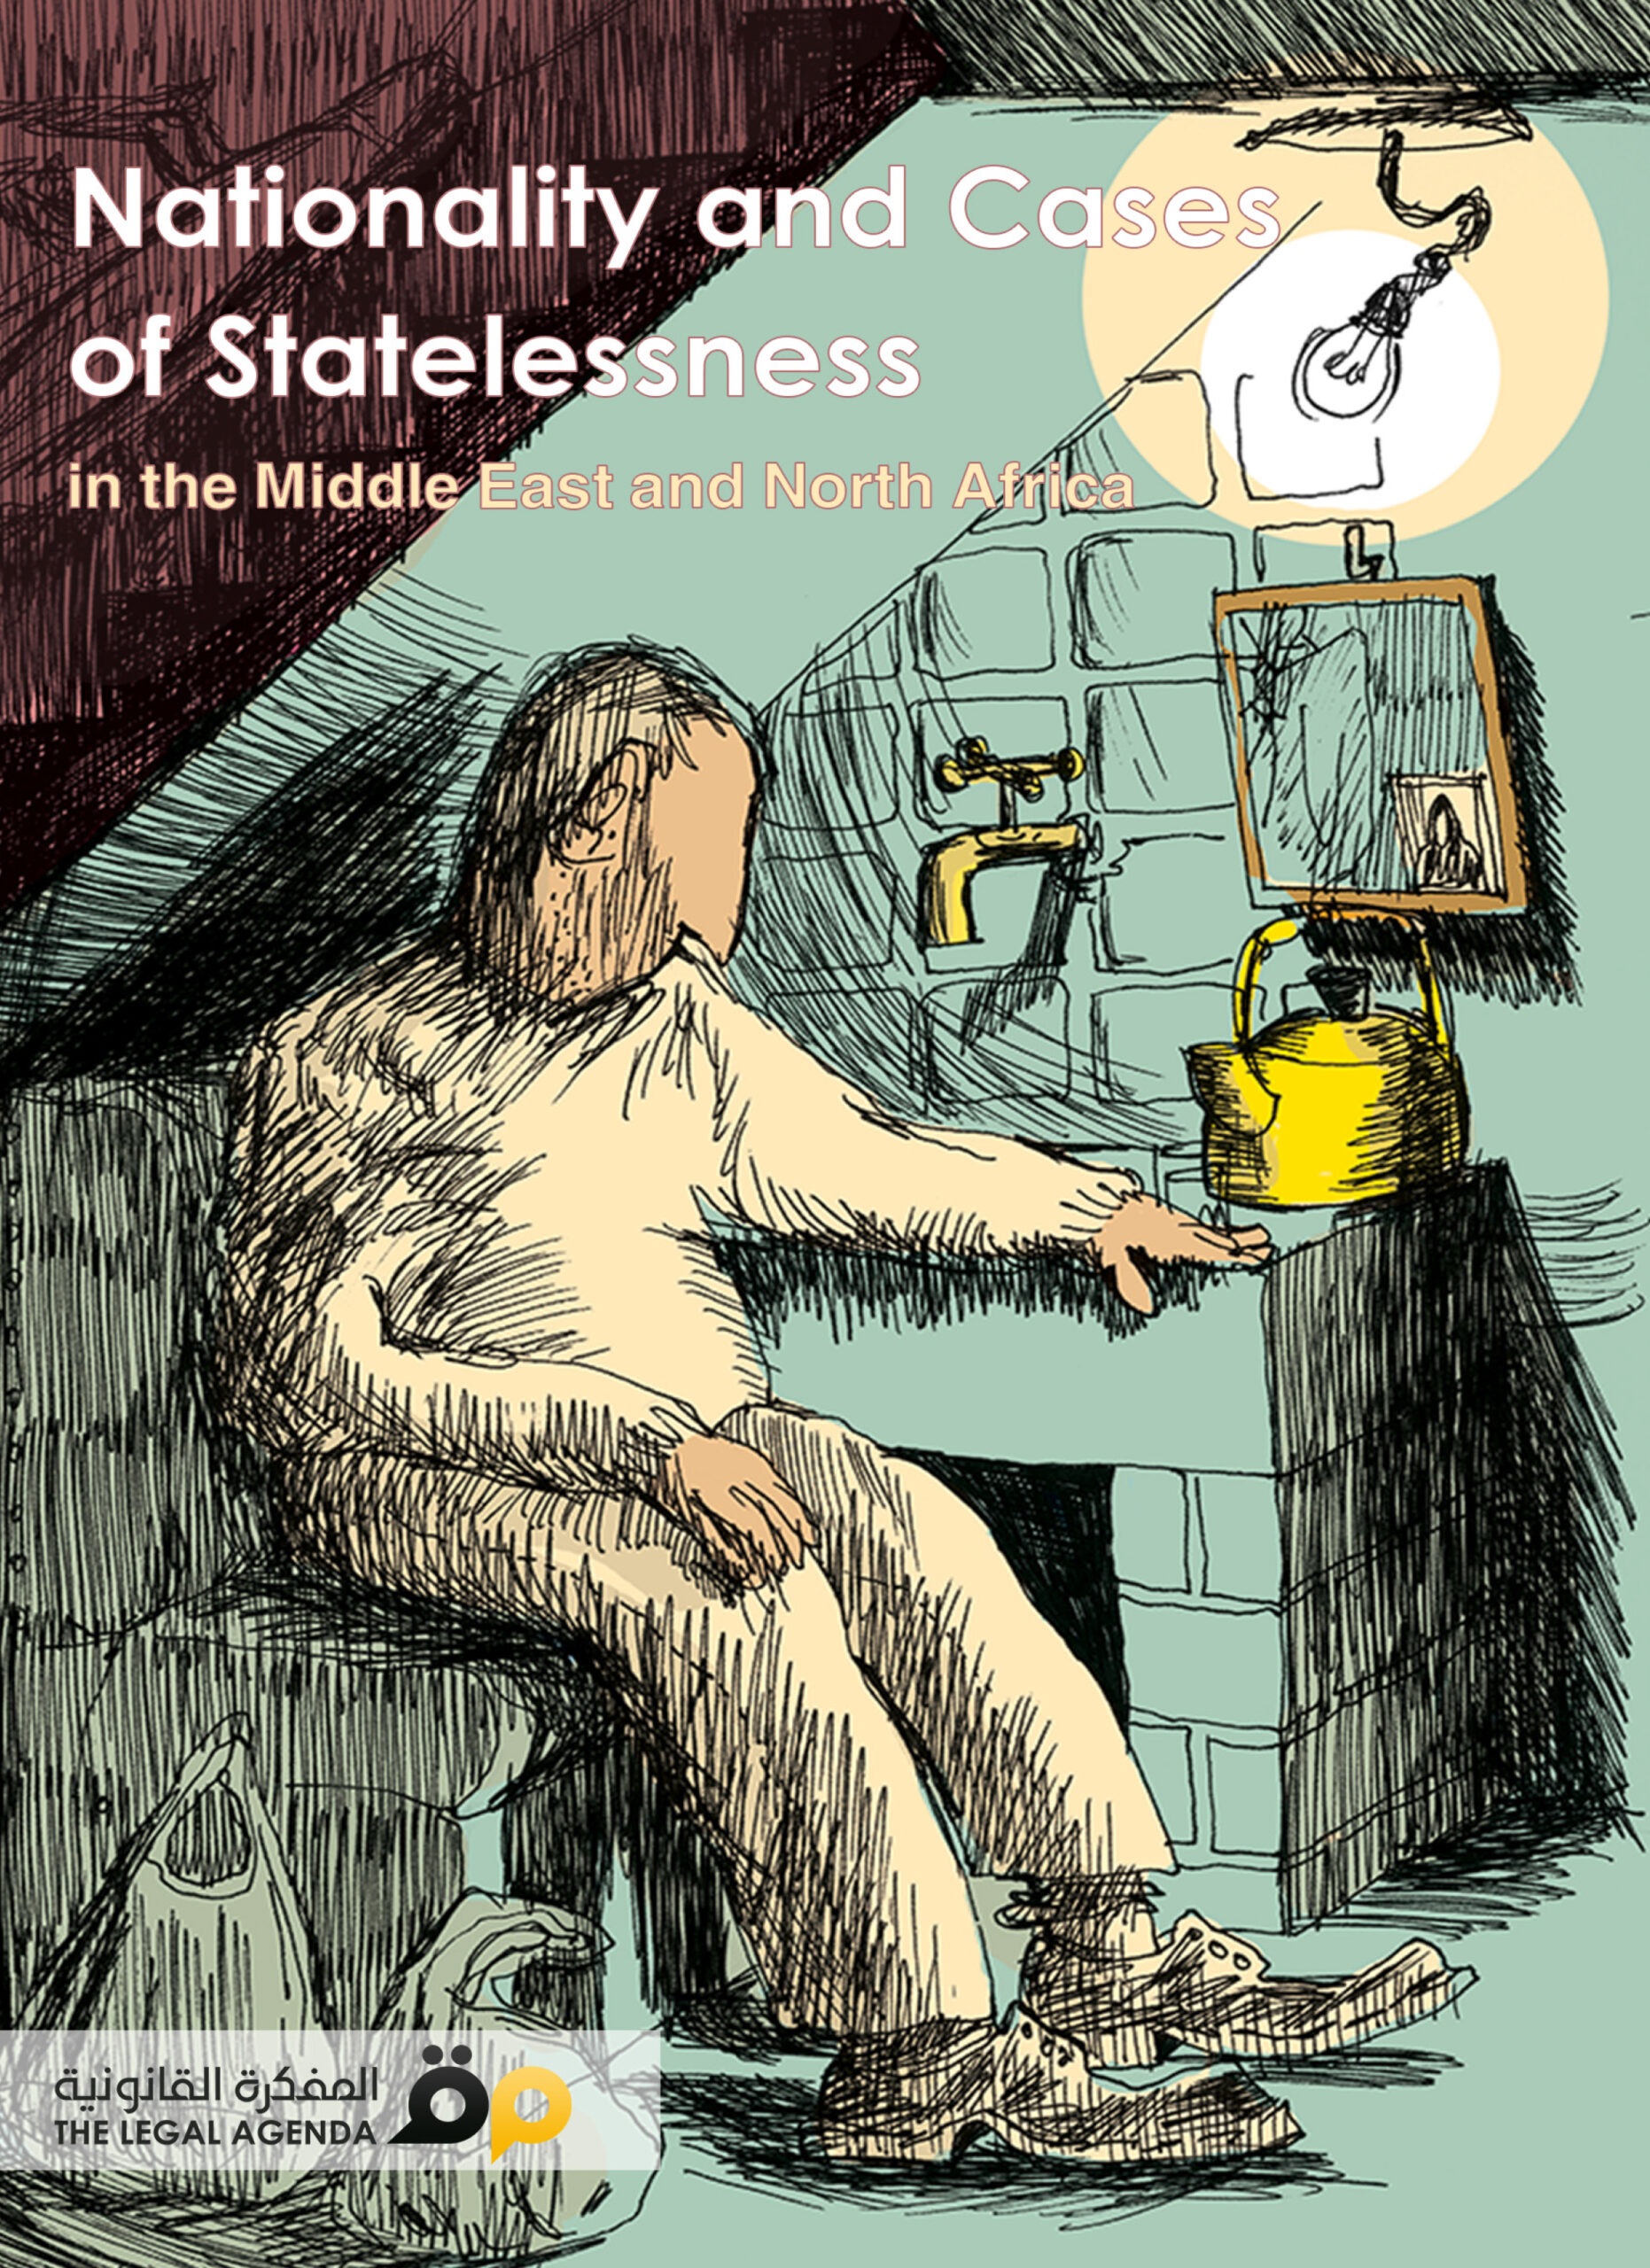 Nationality and Cases of Statelessness: In the Middle East and North Africa